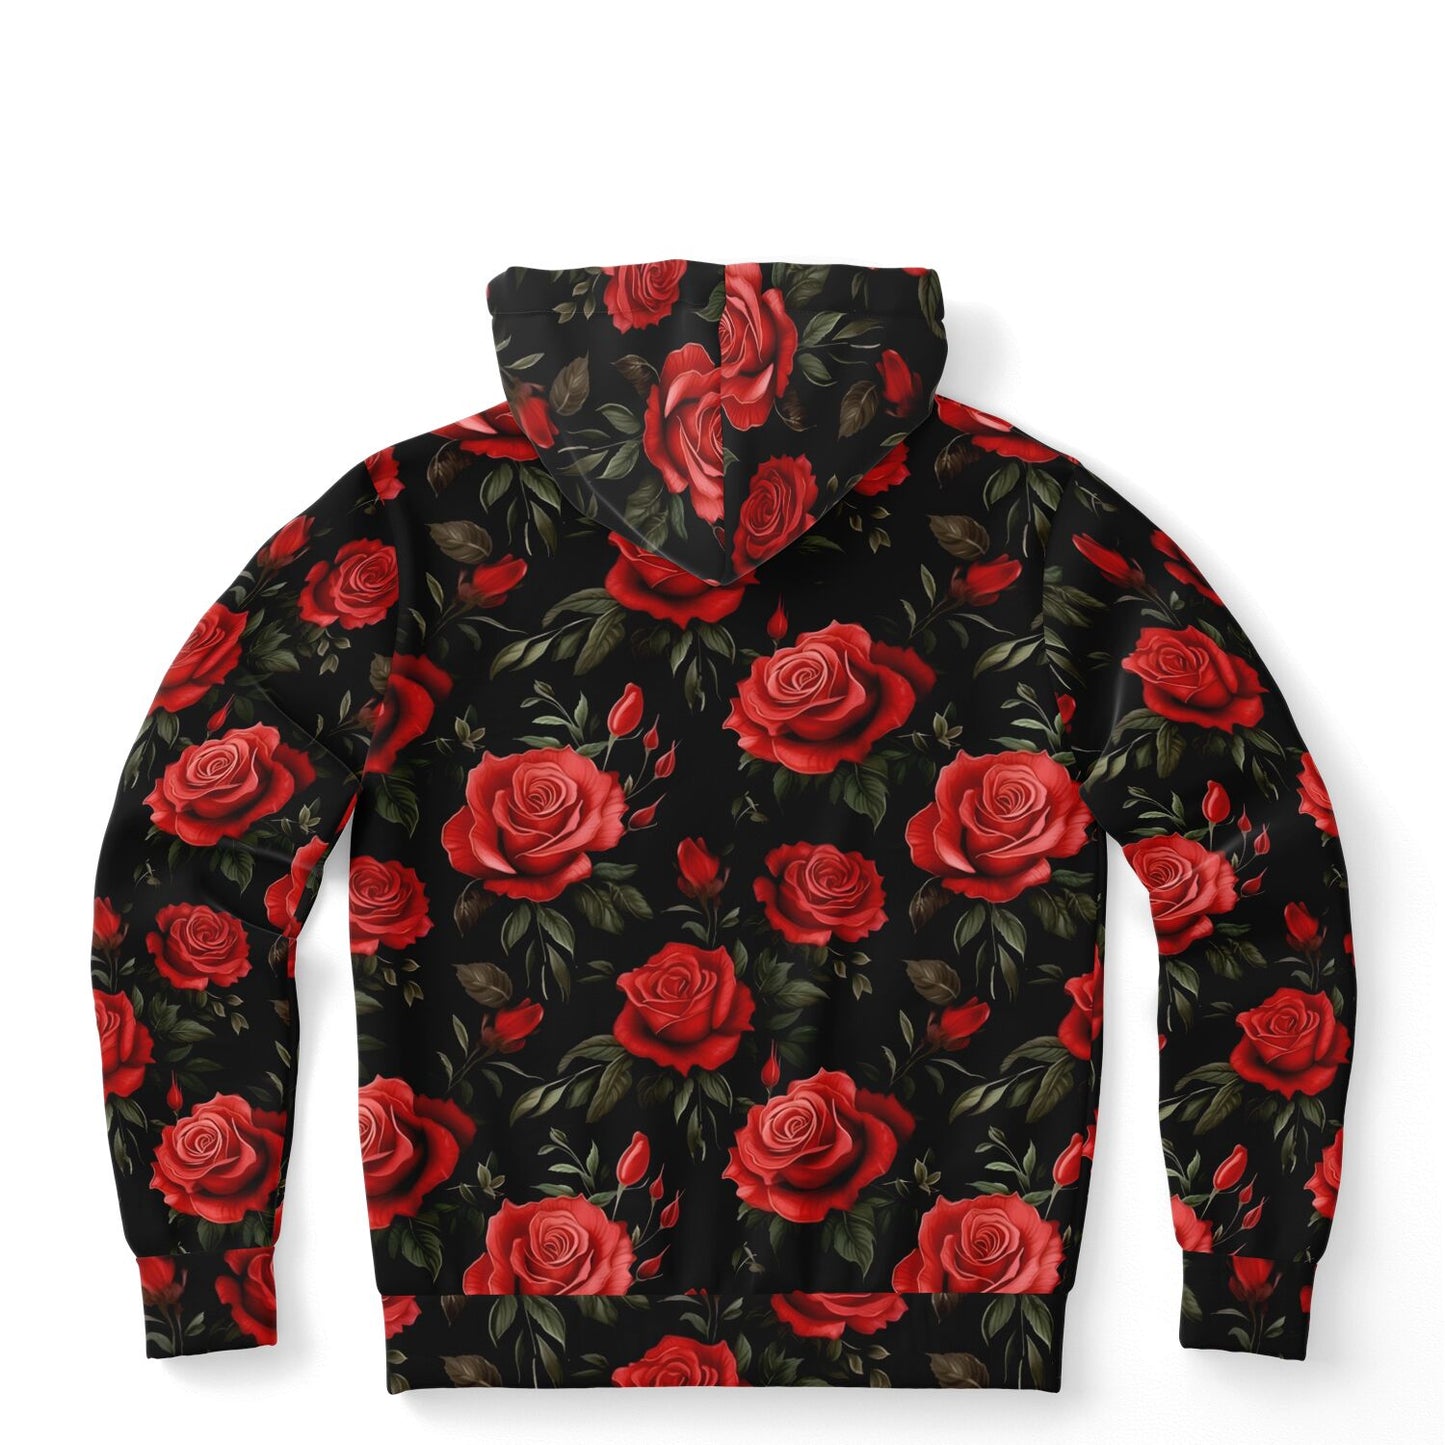 Red Roses Hoodie, Black Floral Flowers Pullover Men Women Adult Aesthetic Graphic Cotton Hooded Sweatshirt with Pockets